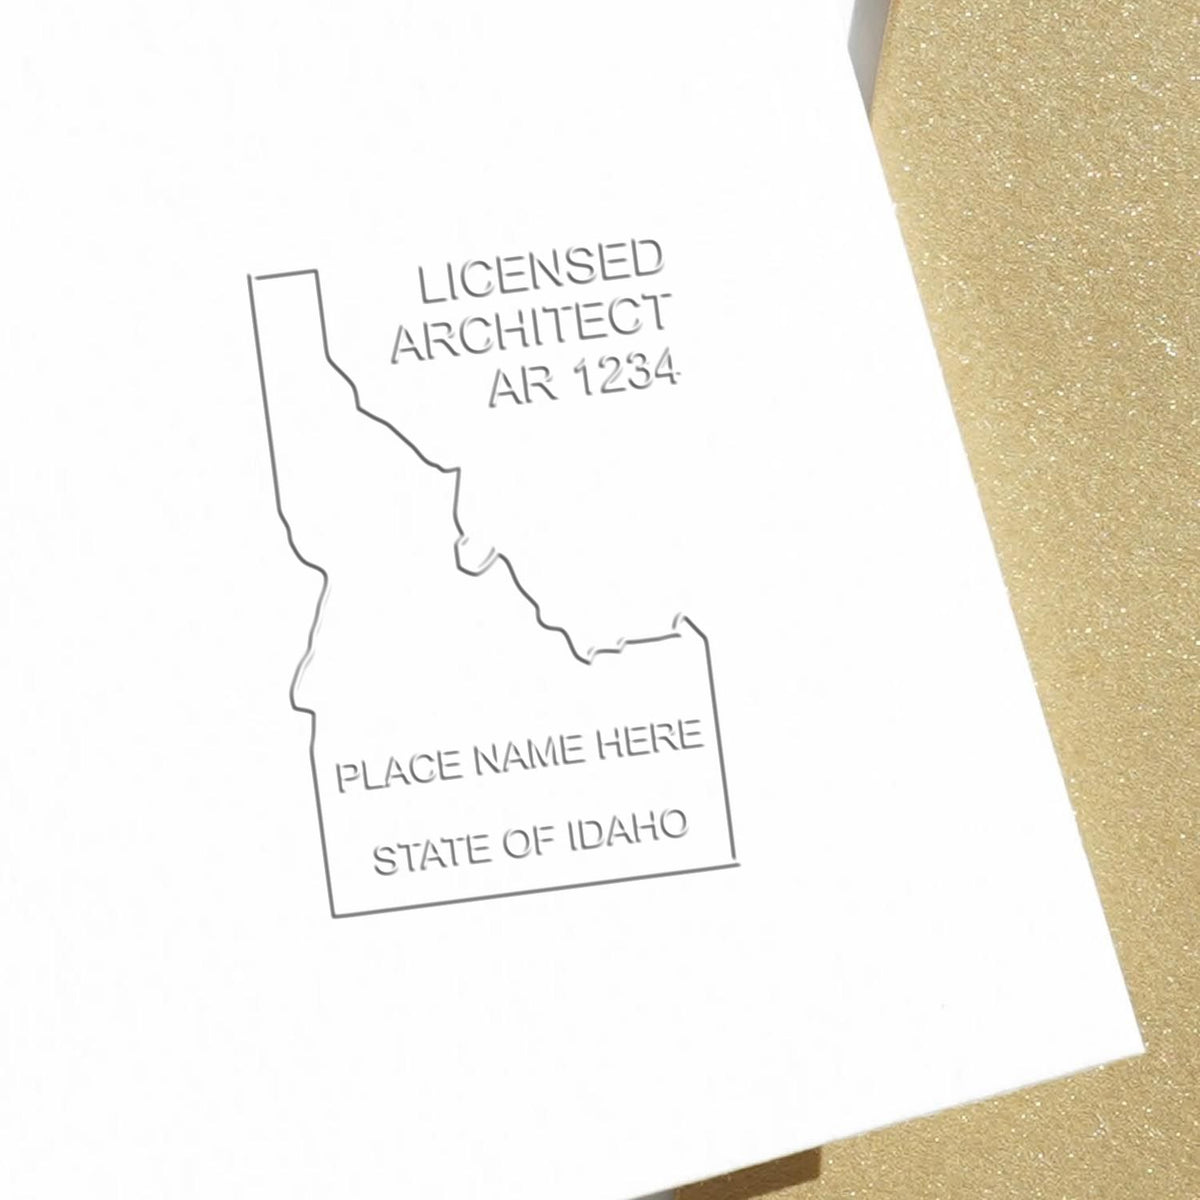 The State of Idaho Long Reach Architectural Embossing Seal stamp impression comes to life with a crisp, detailed photo on paper - showcasing true professional quality.